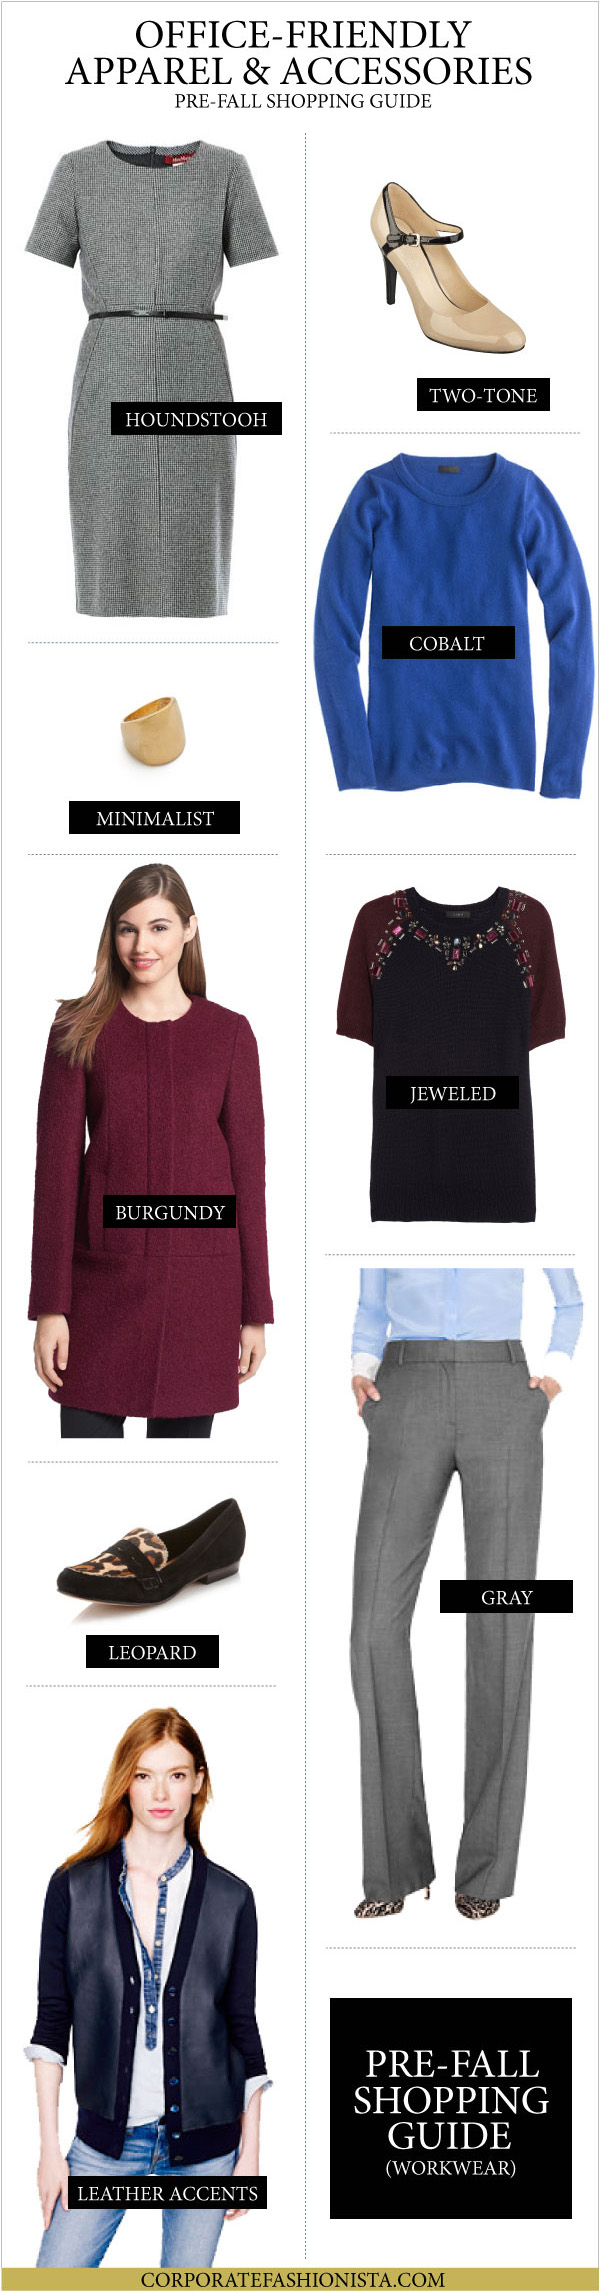 Take Your Pick! 9 Pieces To Help Transition Your Wardrobe Into Fall With Ease | CorporateFashionista.com Products List